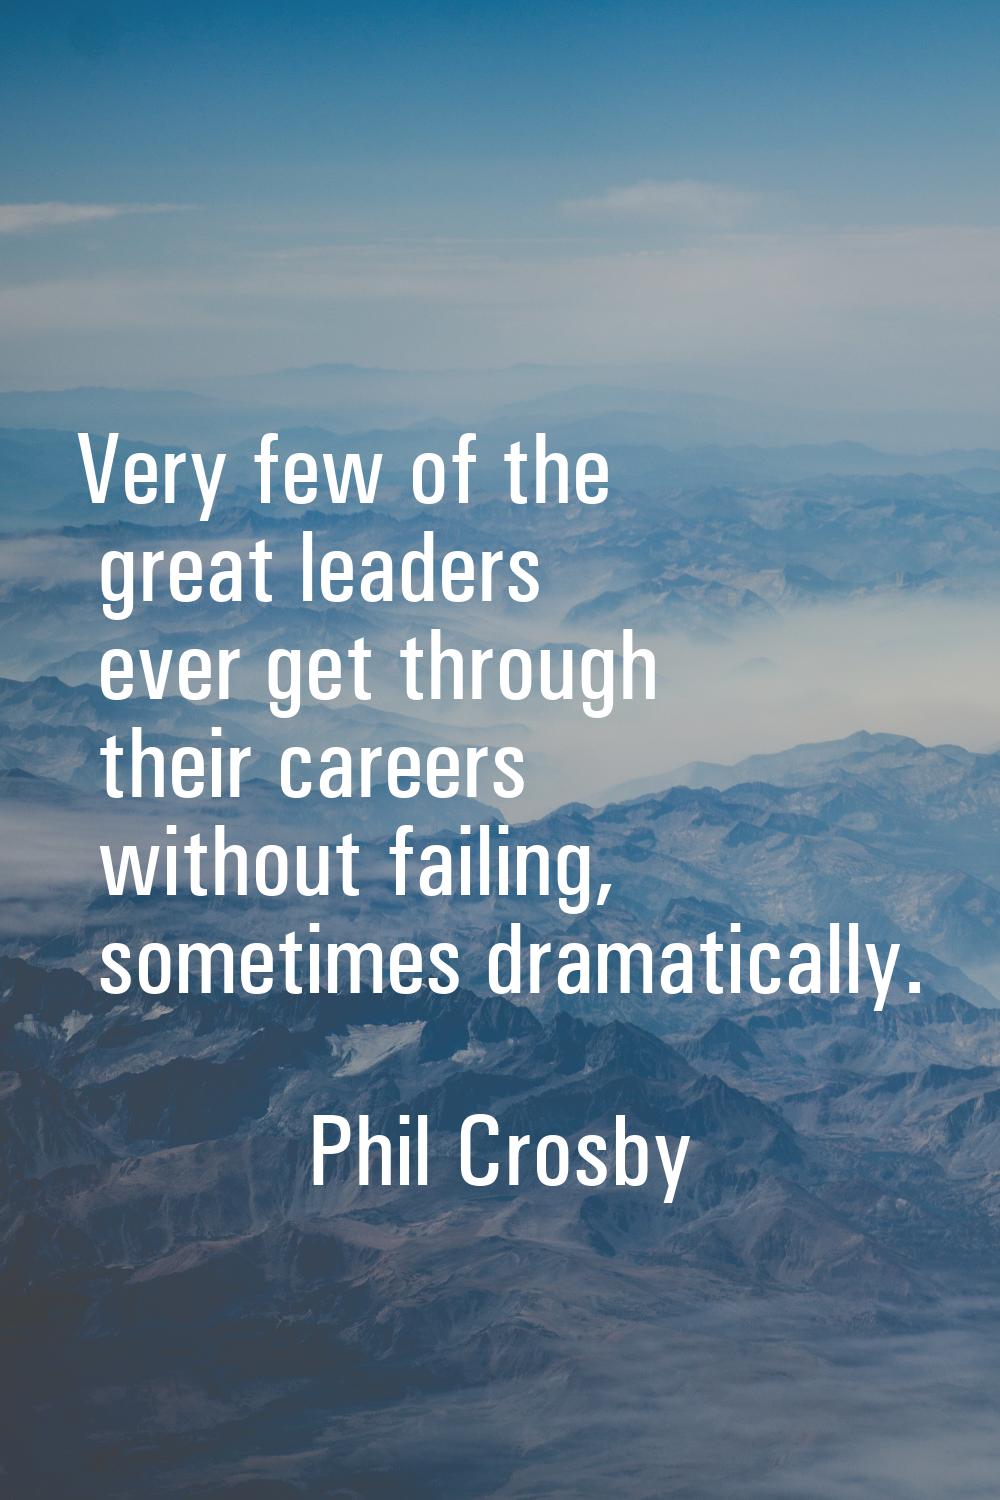 Very few of the great leaders ever get through their careers without failing, sometimes dramaticall